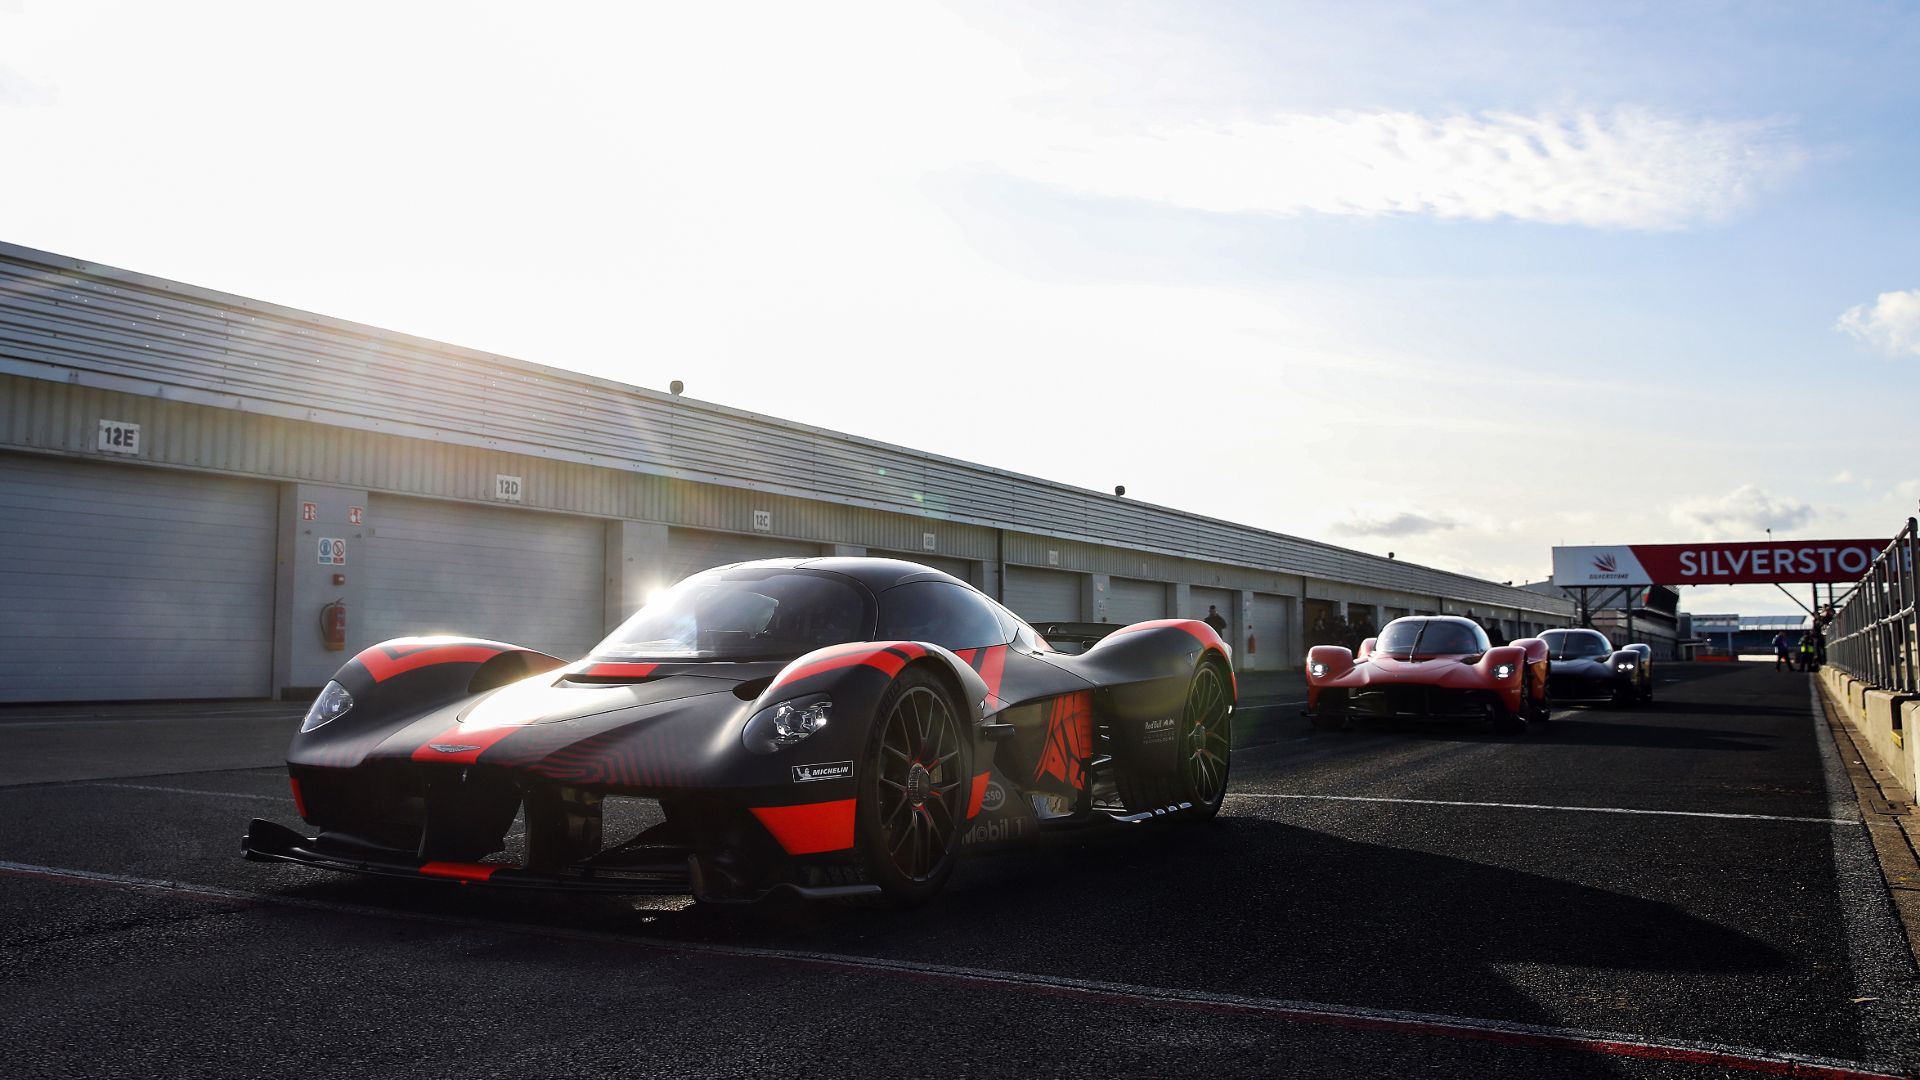 Aston Martin Valkyrie prototypes tested by F1 drivers at Silverstone